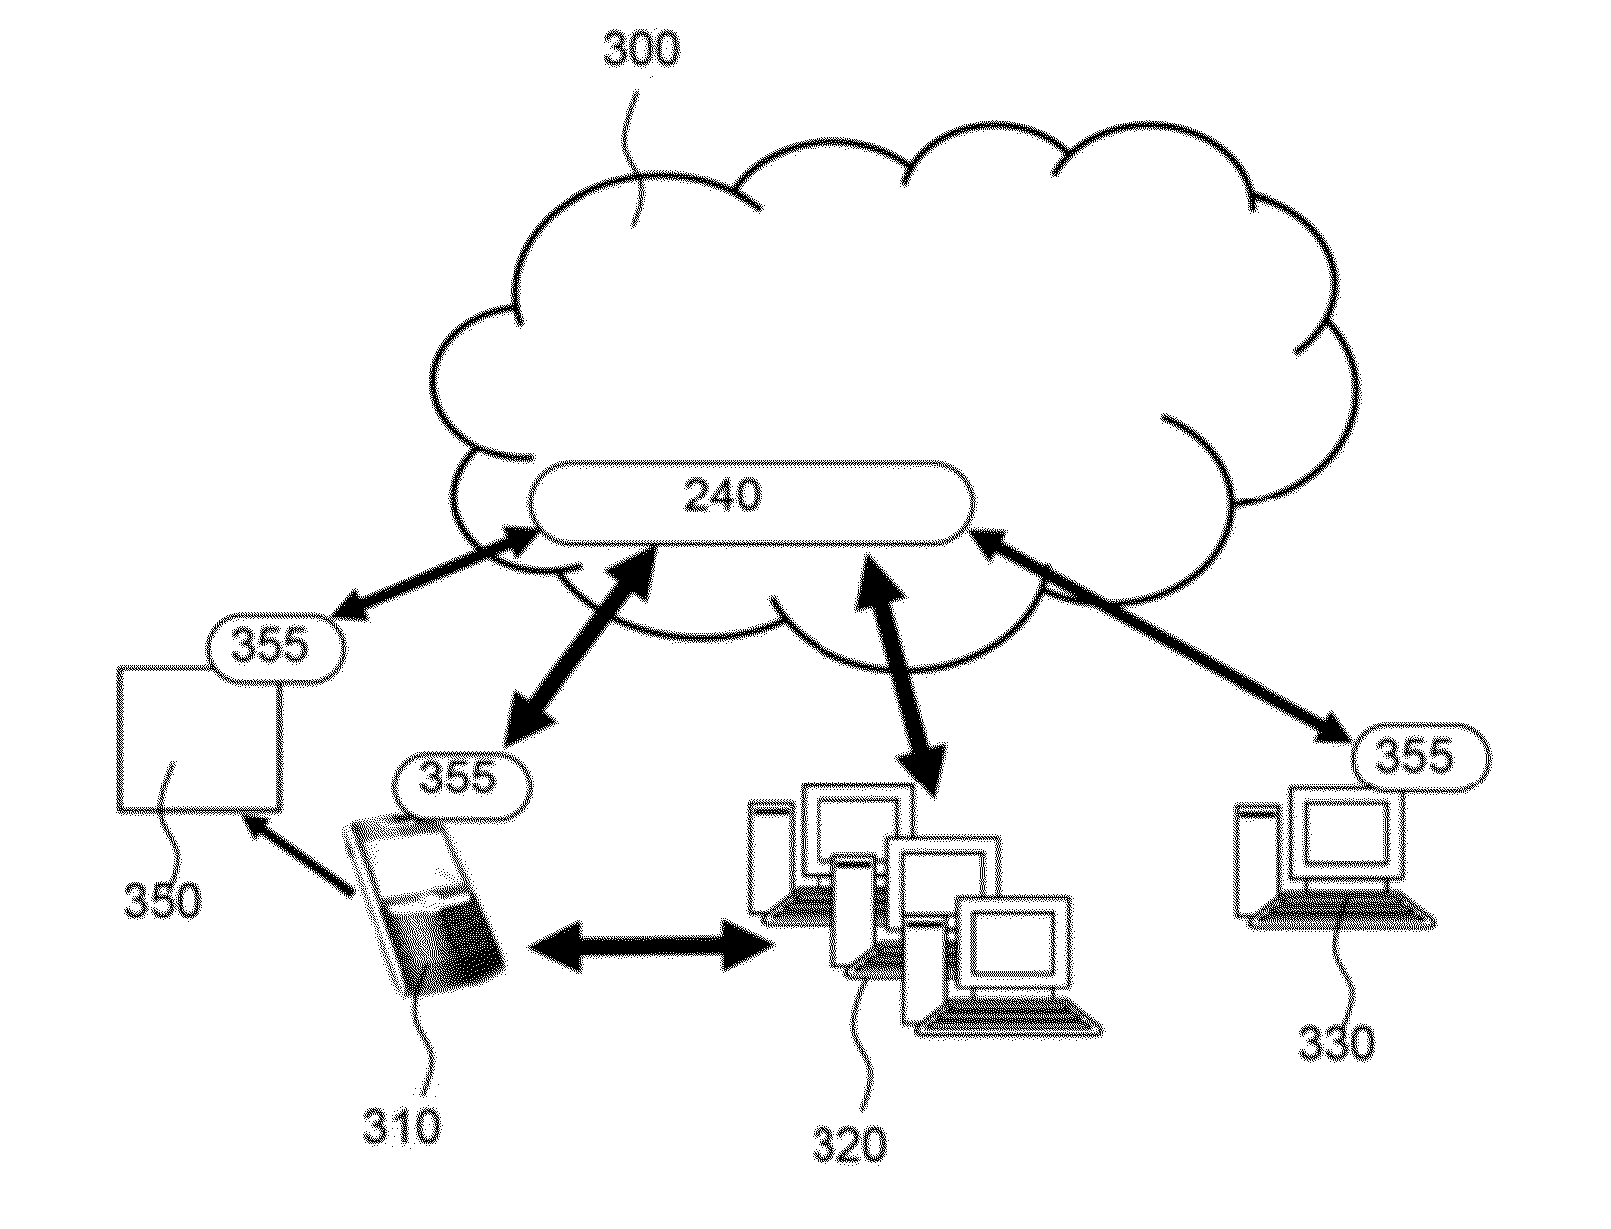 System and method for representing user interaction with a web service